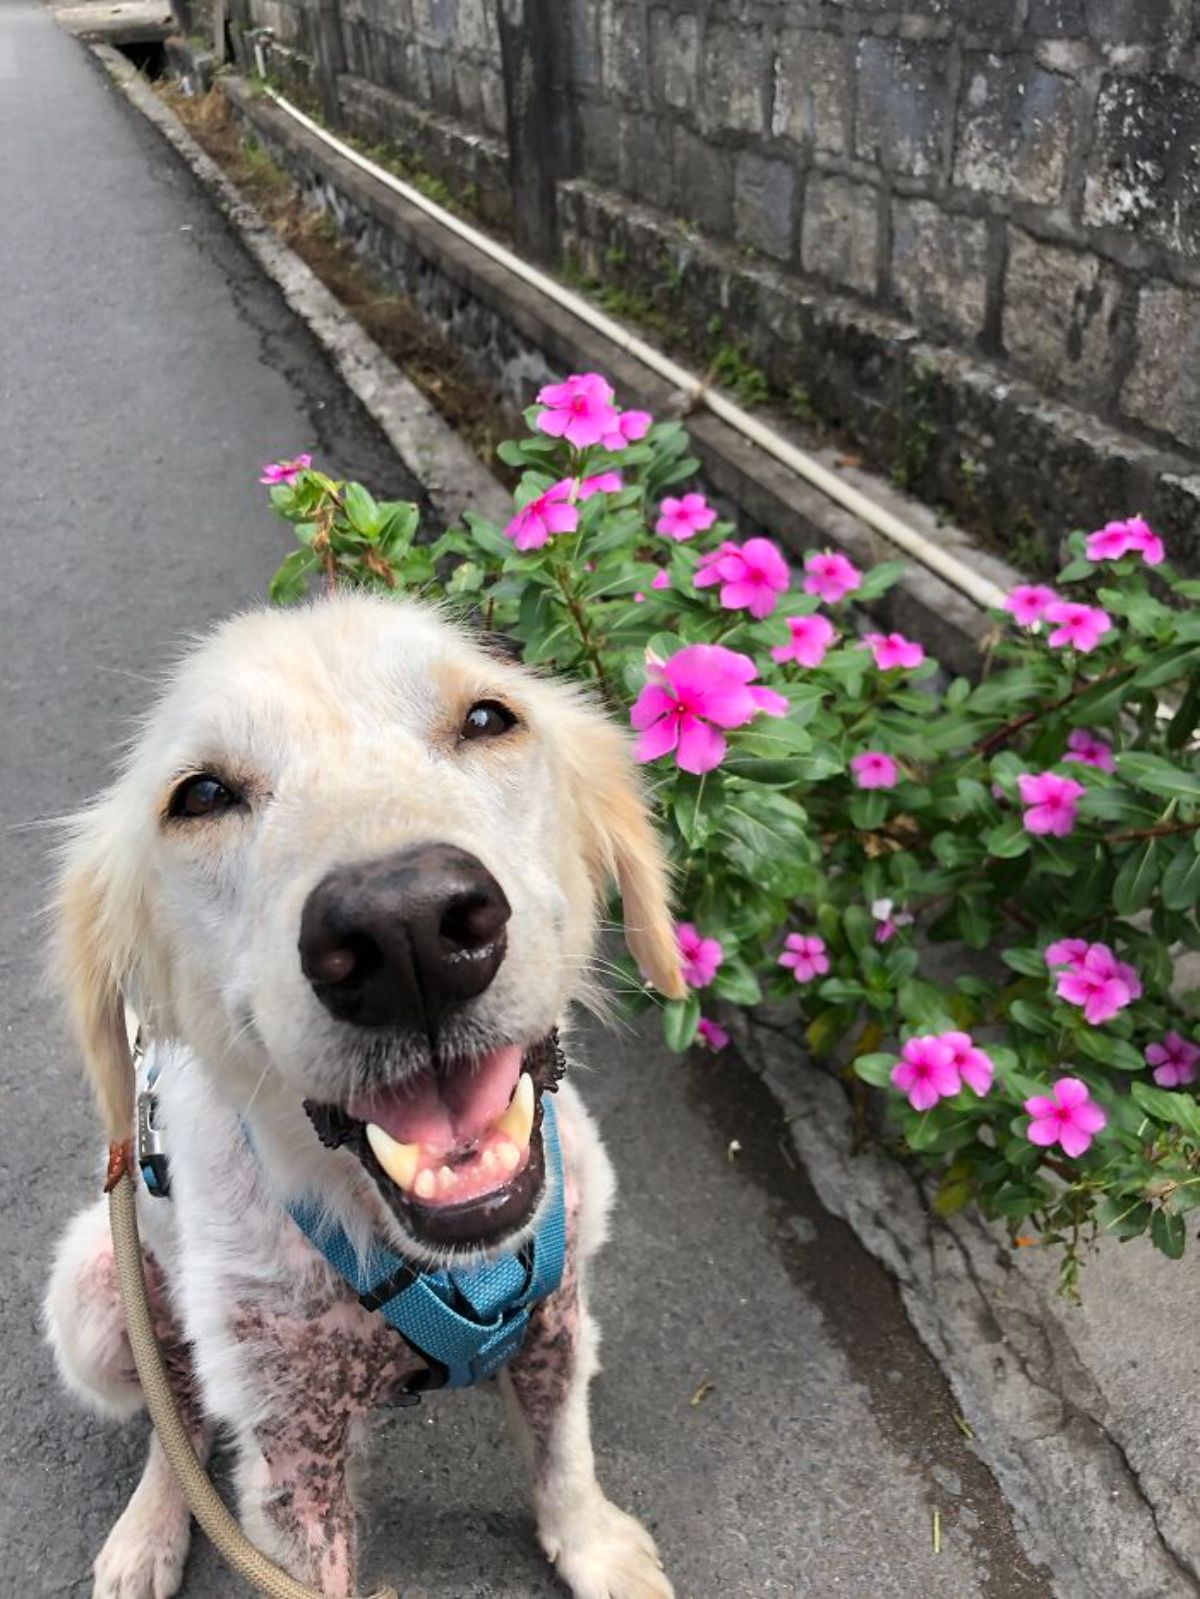 thin and mostly fur-less white dog wearing a leash and blue harness sitting next to a bush of pink flowers